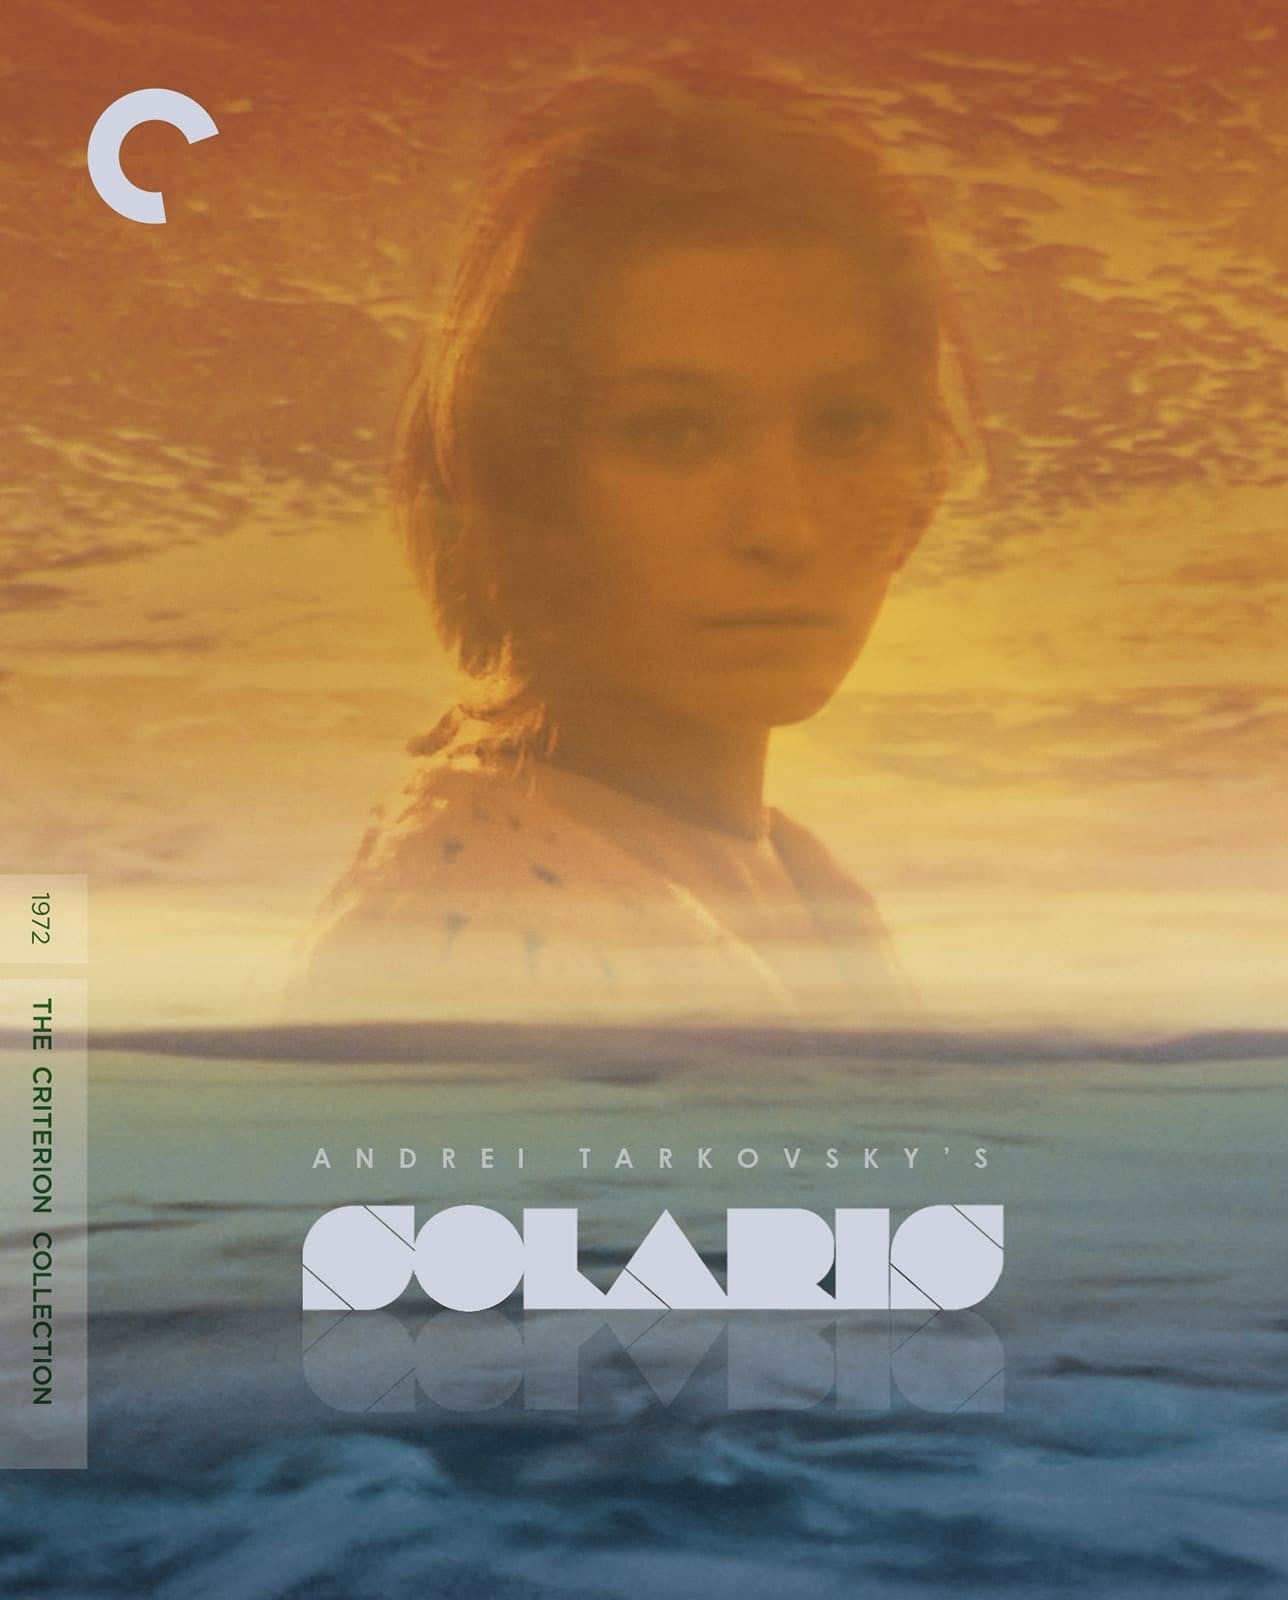 Solaris - Criterion Collection (Blu-ray)